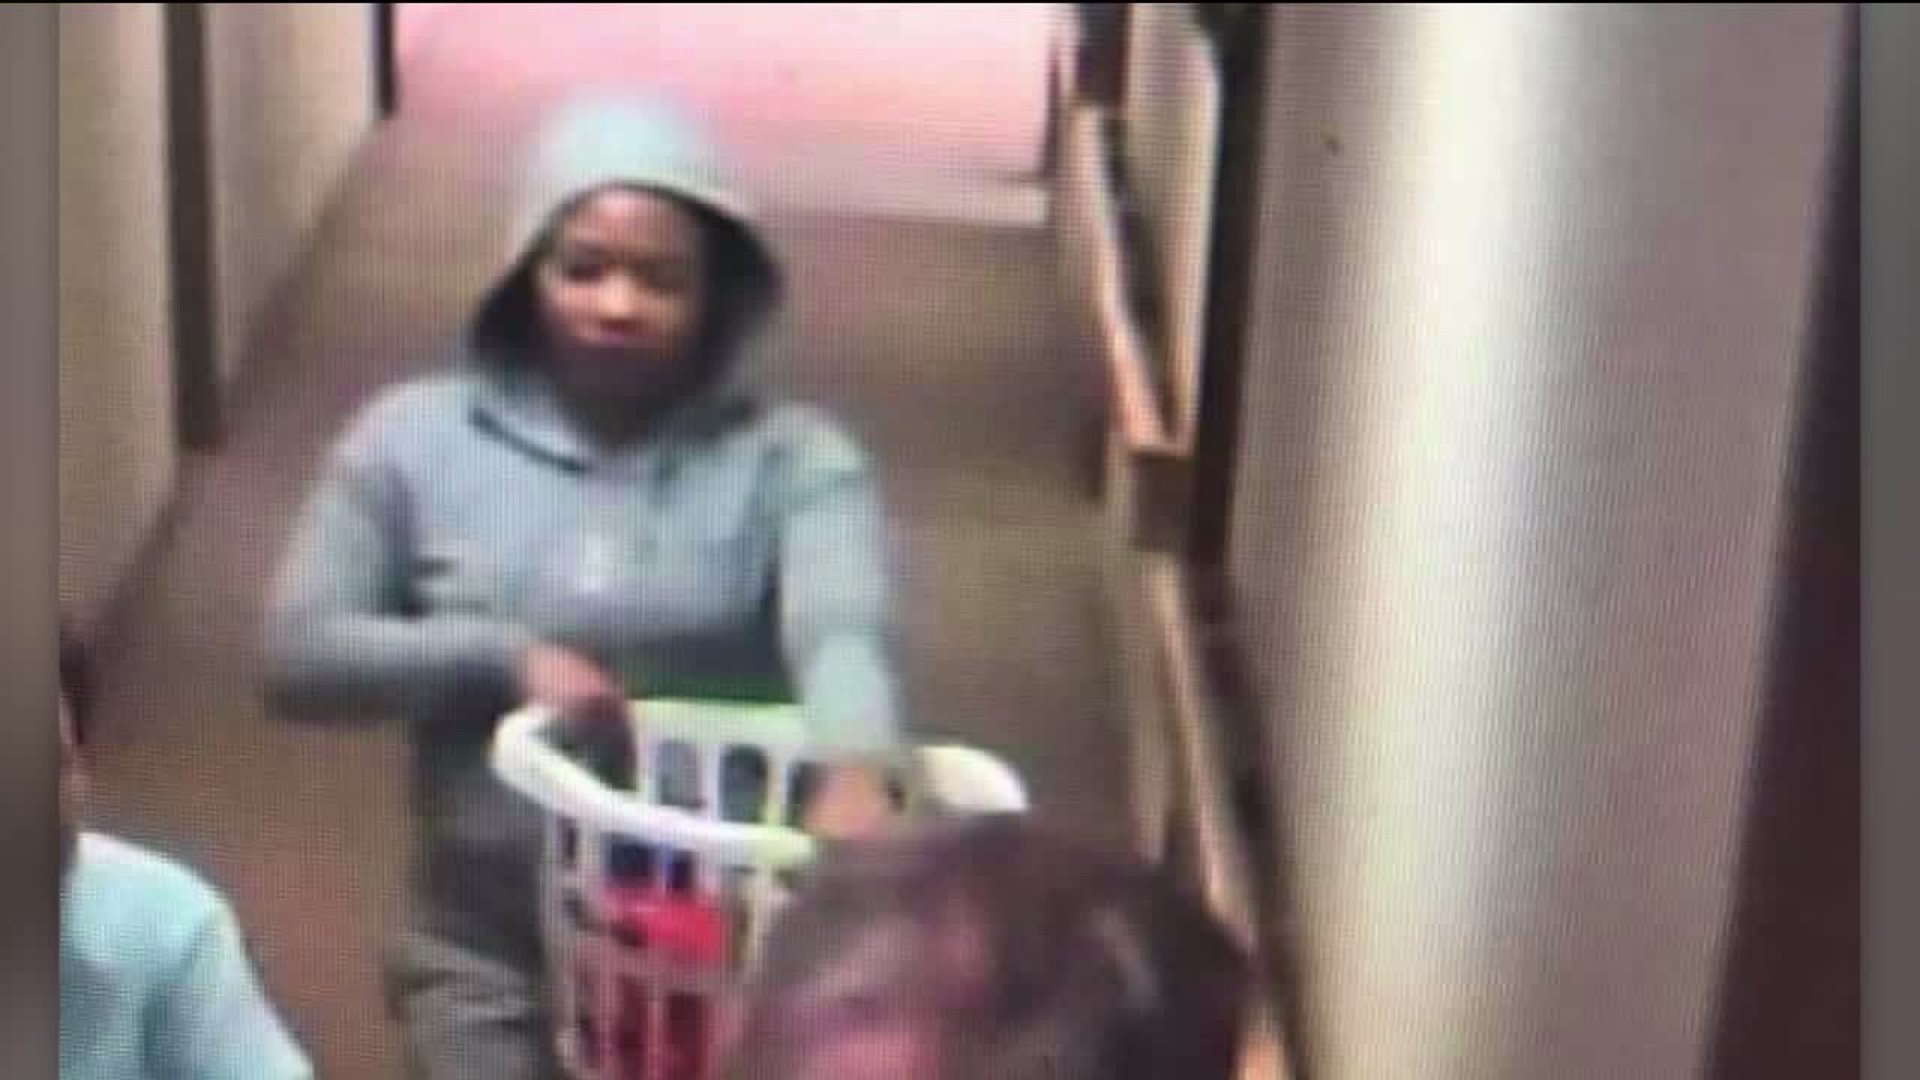 Police: Woman Posed as Caregiver to Steal from Elderly Woman